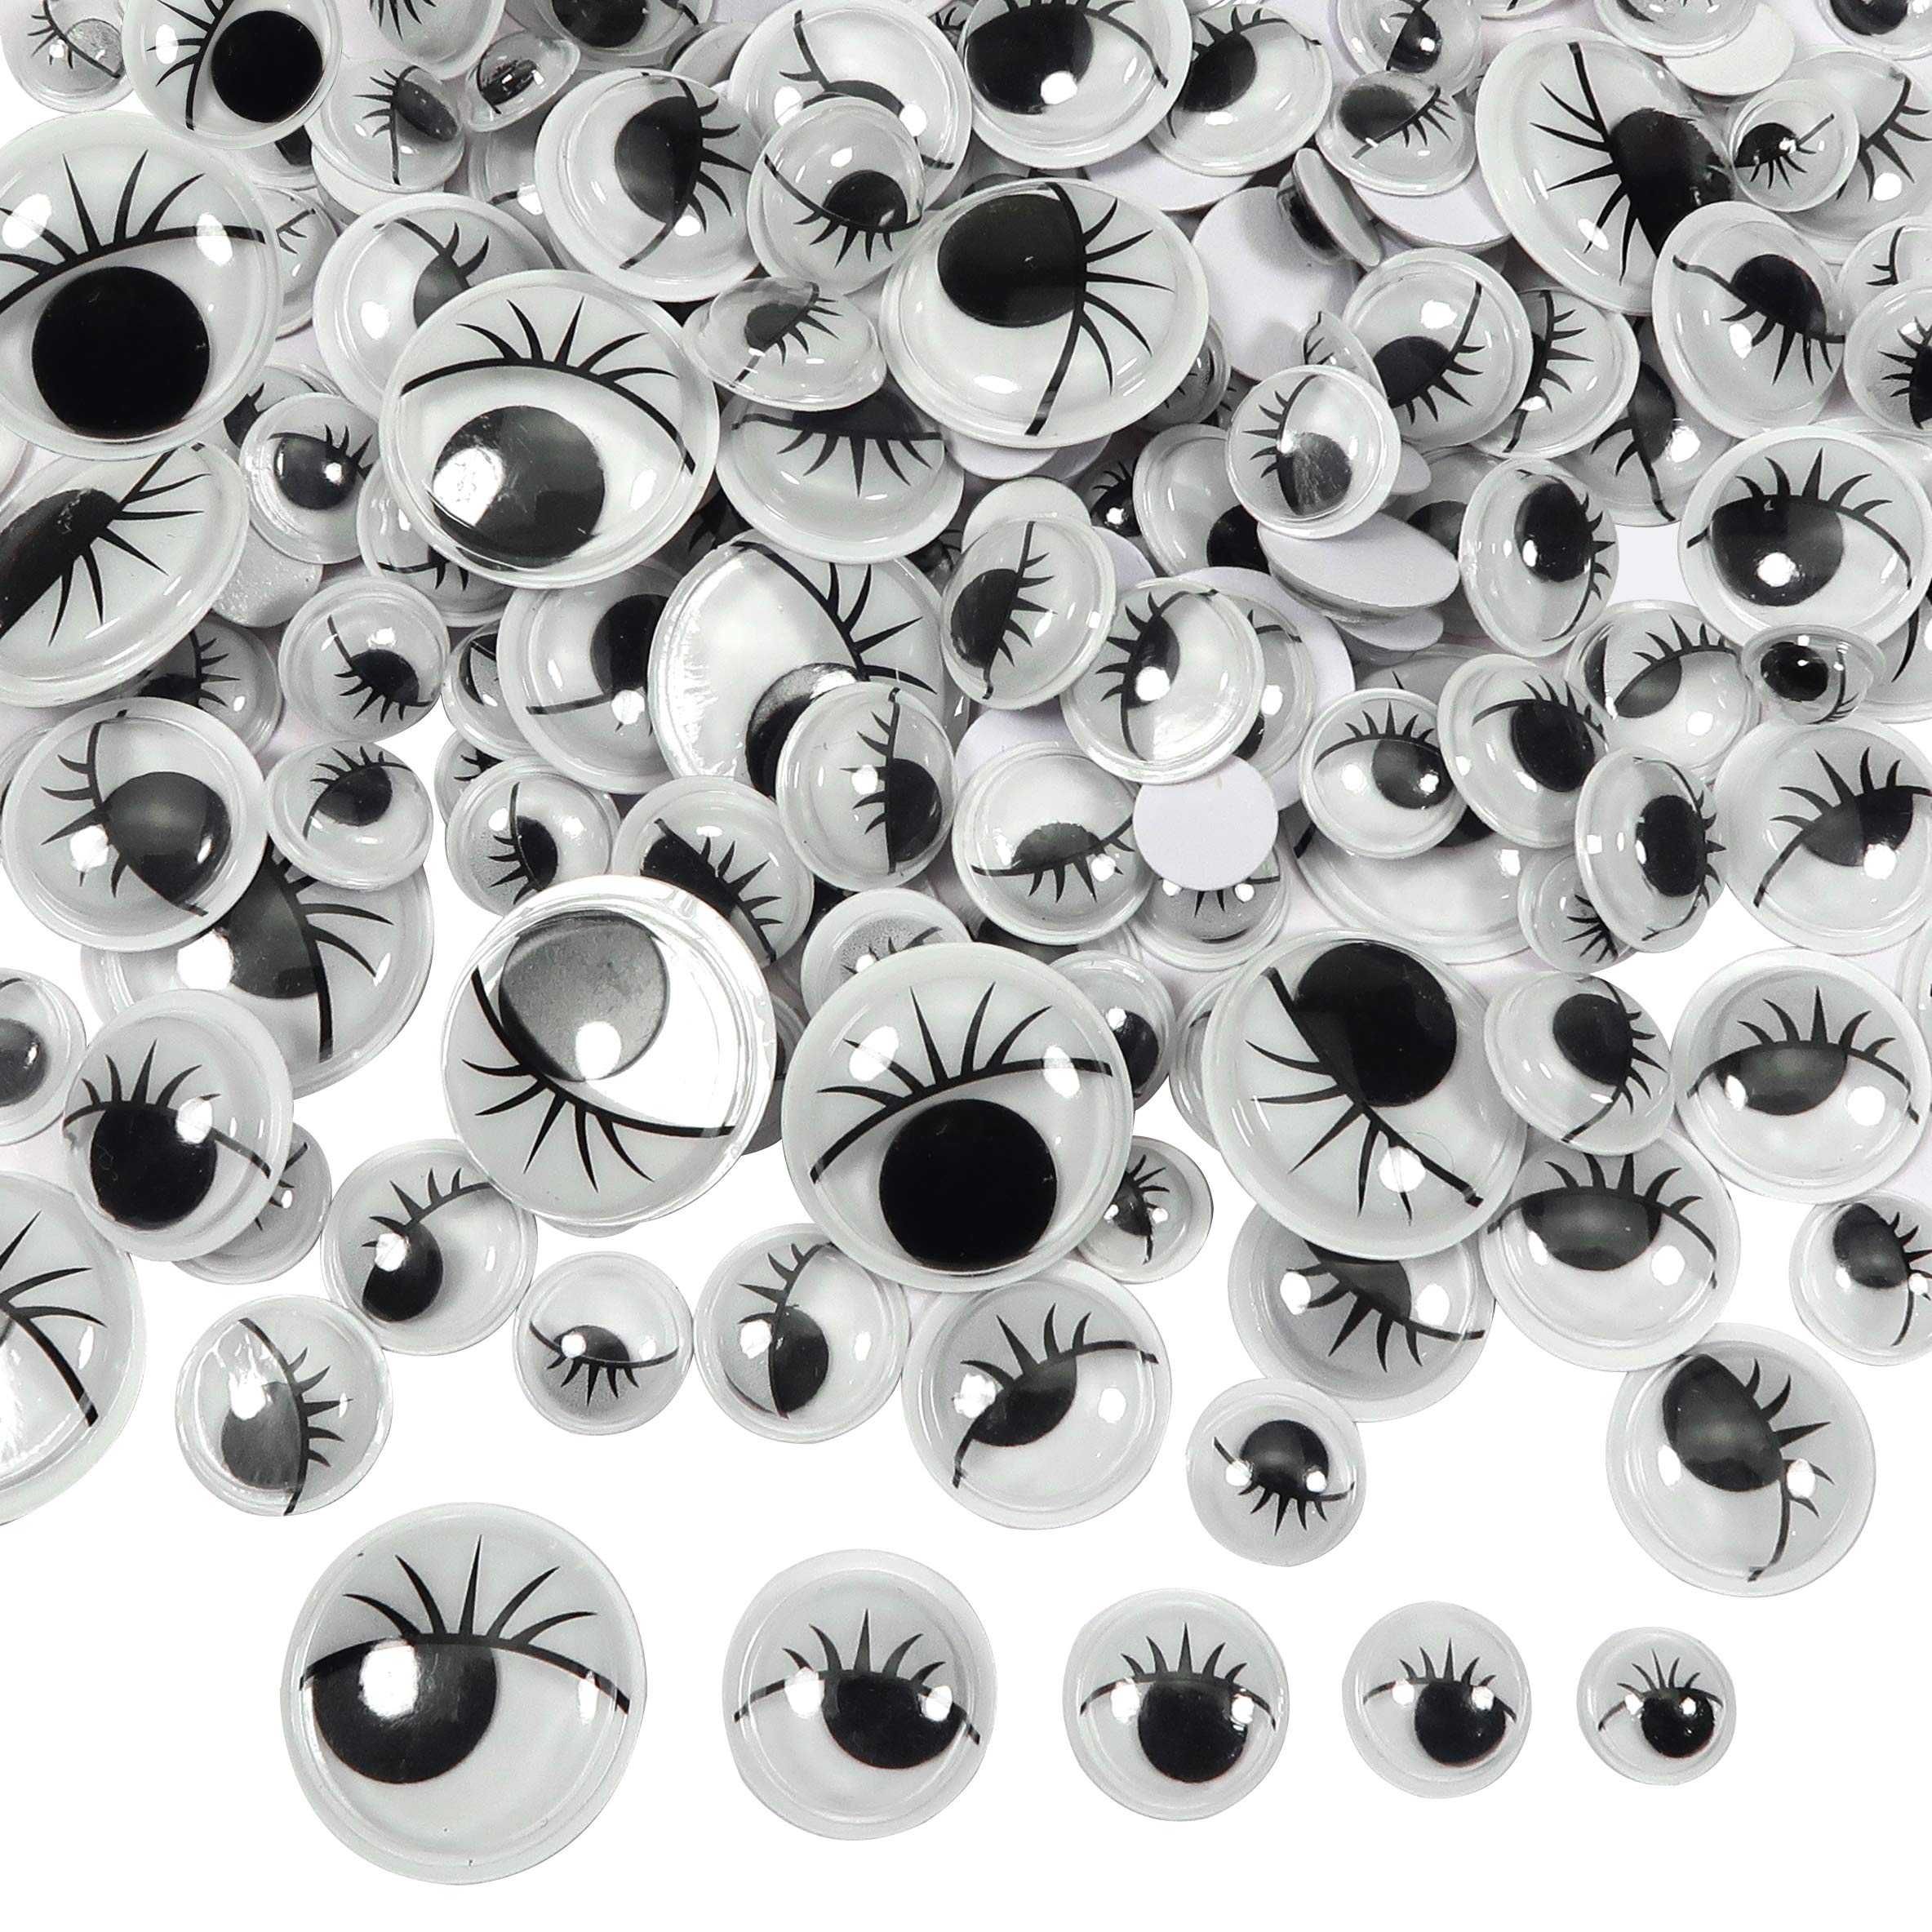 TOAOB 200pcs Black Wiggle Googly Eyes Self Adhesive with Eyelashes Round  8mm 10mm 12mm 15mm 20mm Plastic Sticker Eyes for DIY Crafts Scrapbooking  Decoration